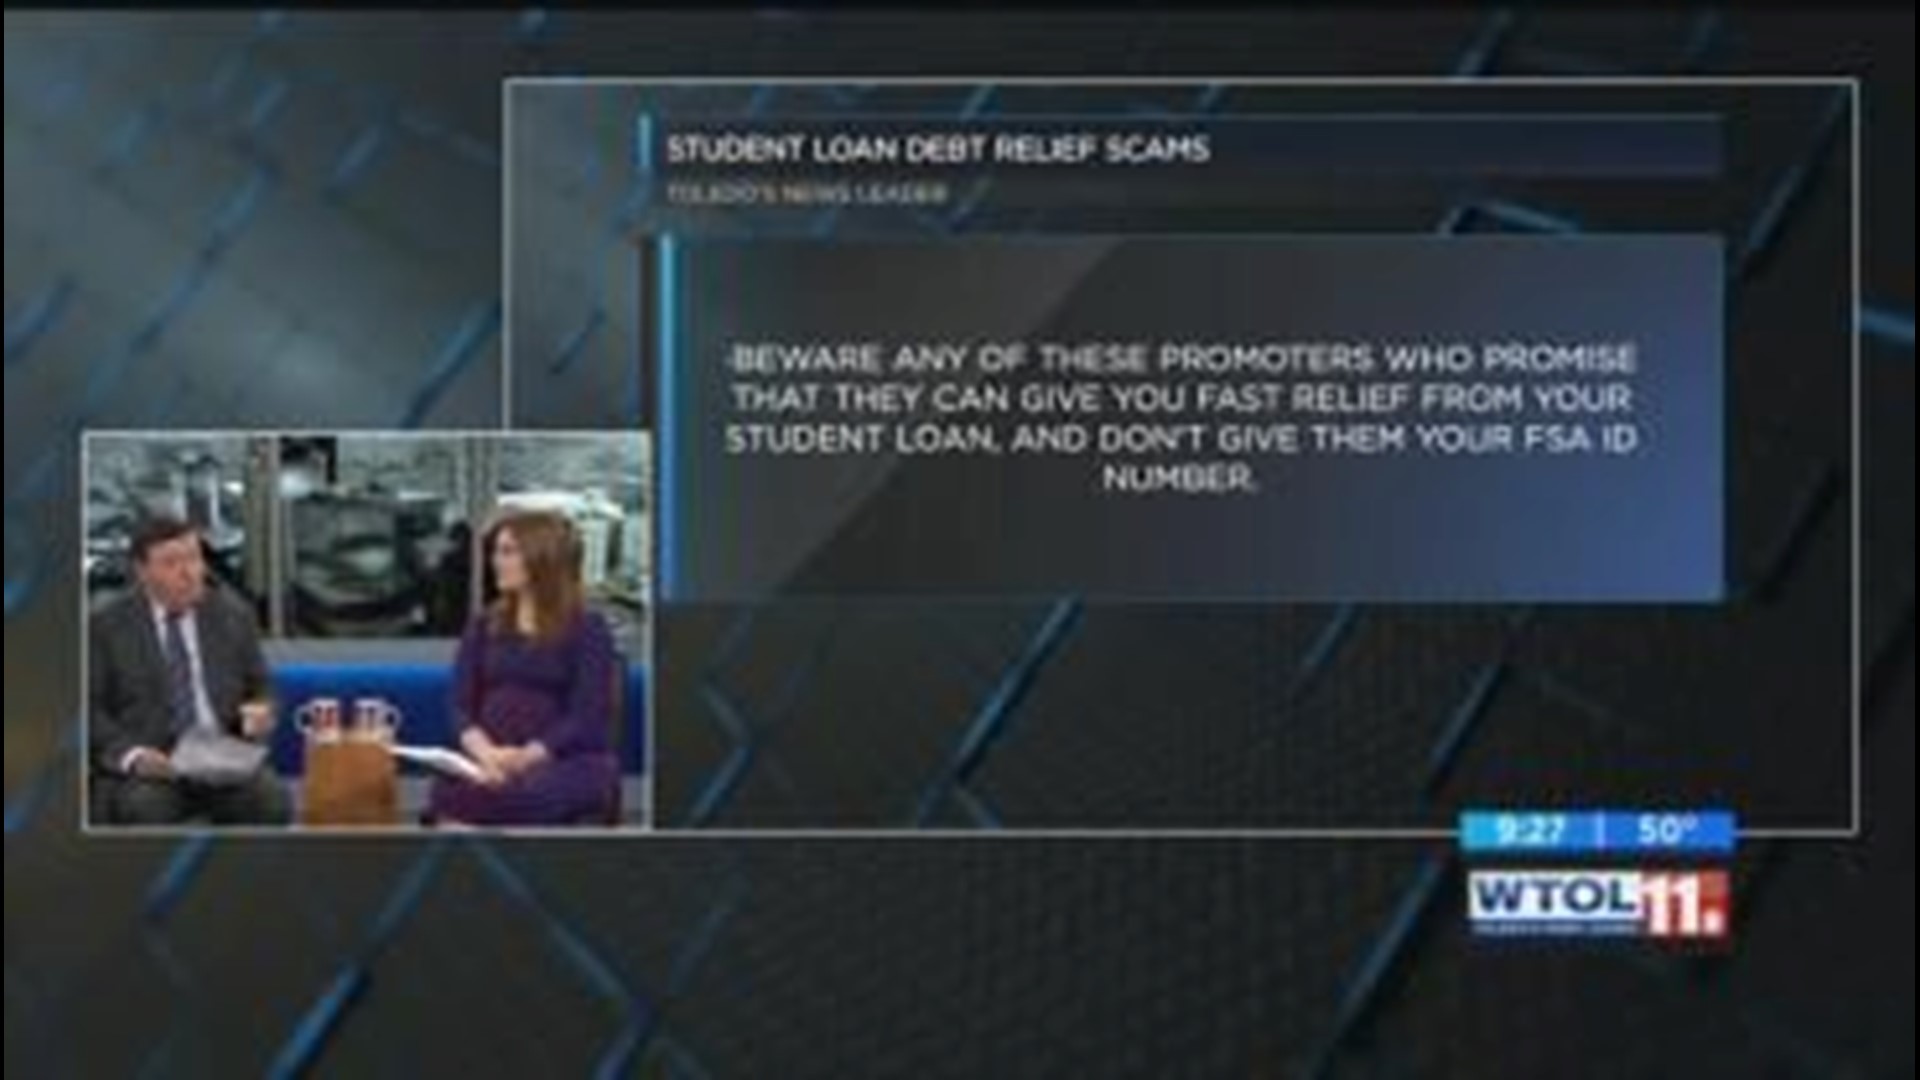 BBB warns of student debt relief scams